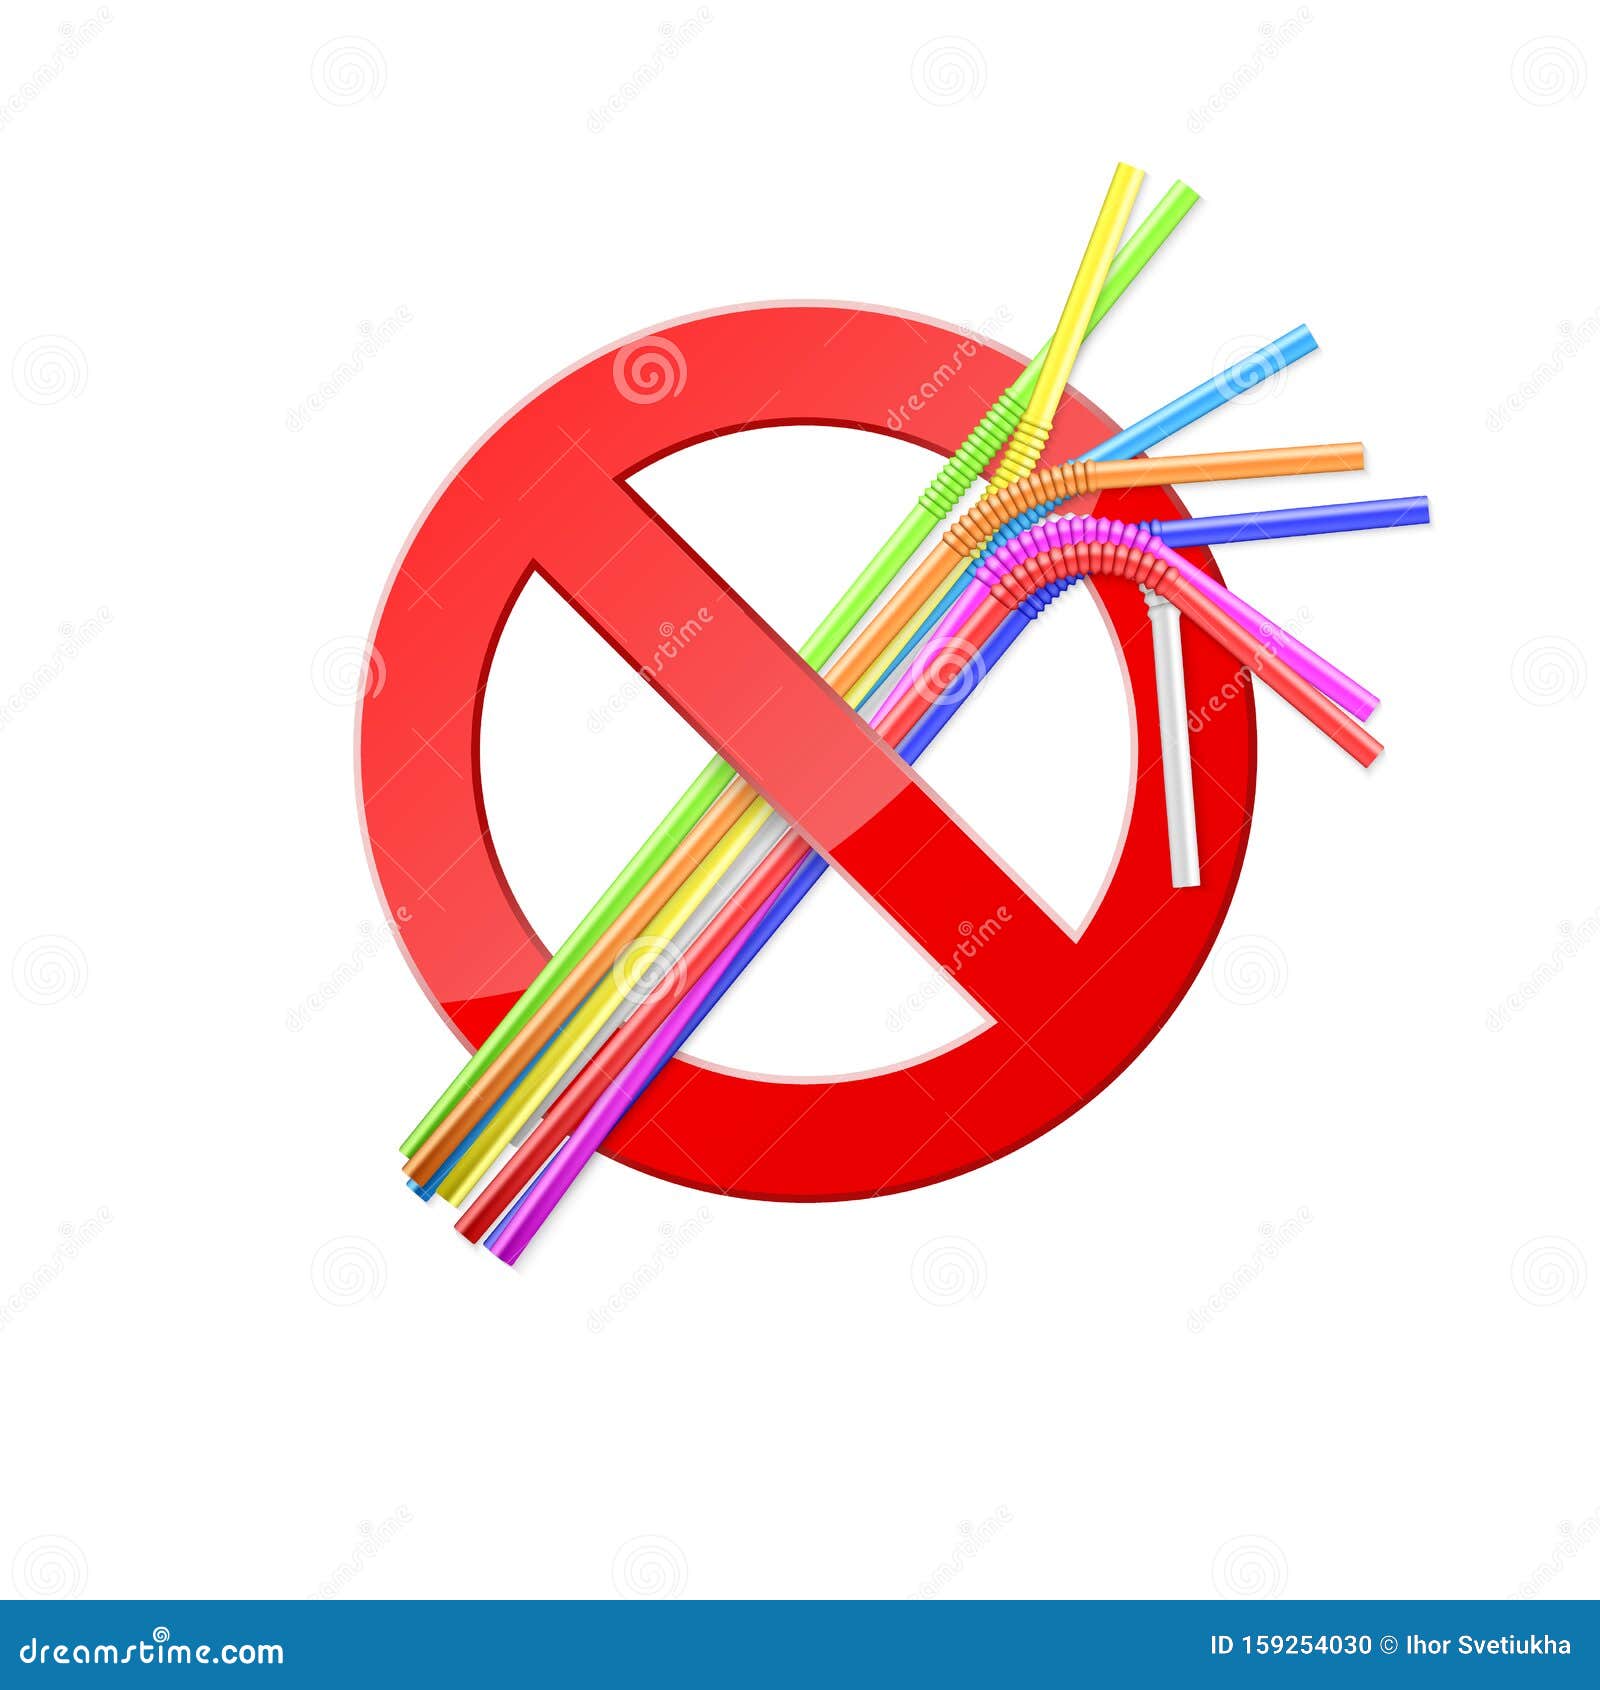 Stop Using Plastic Straws, Stop Plastic Pollution-Reduce, The